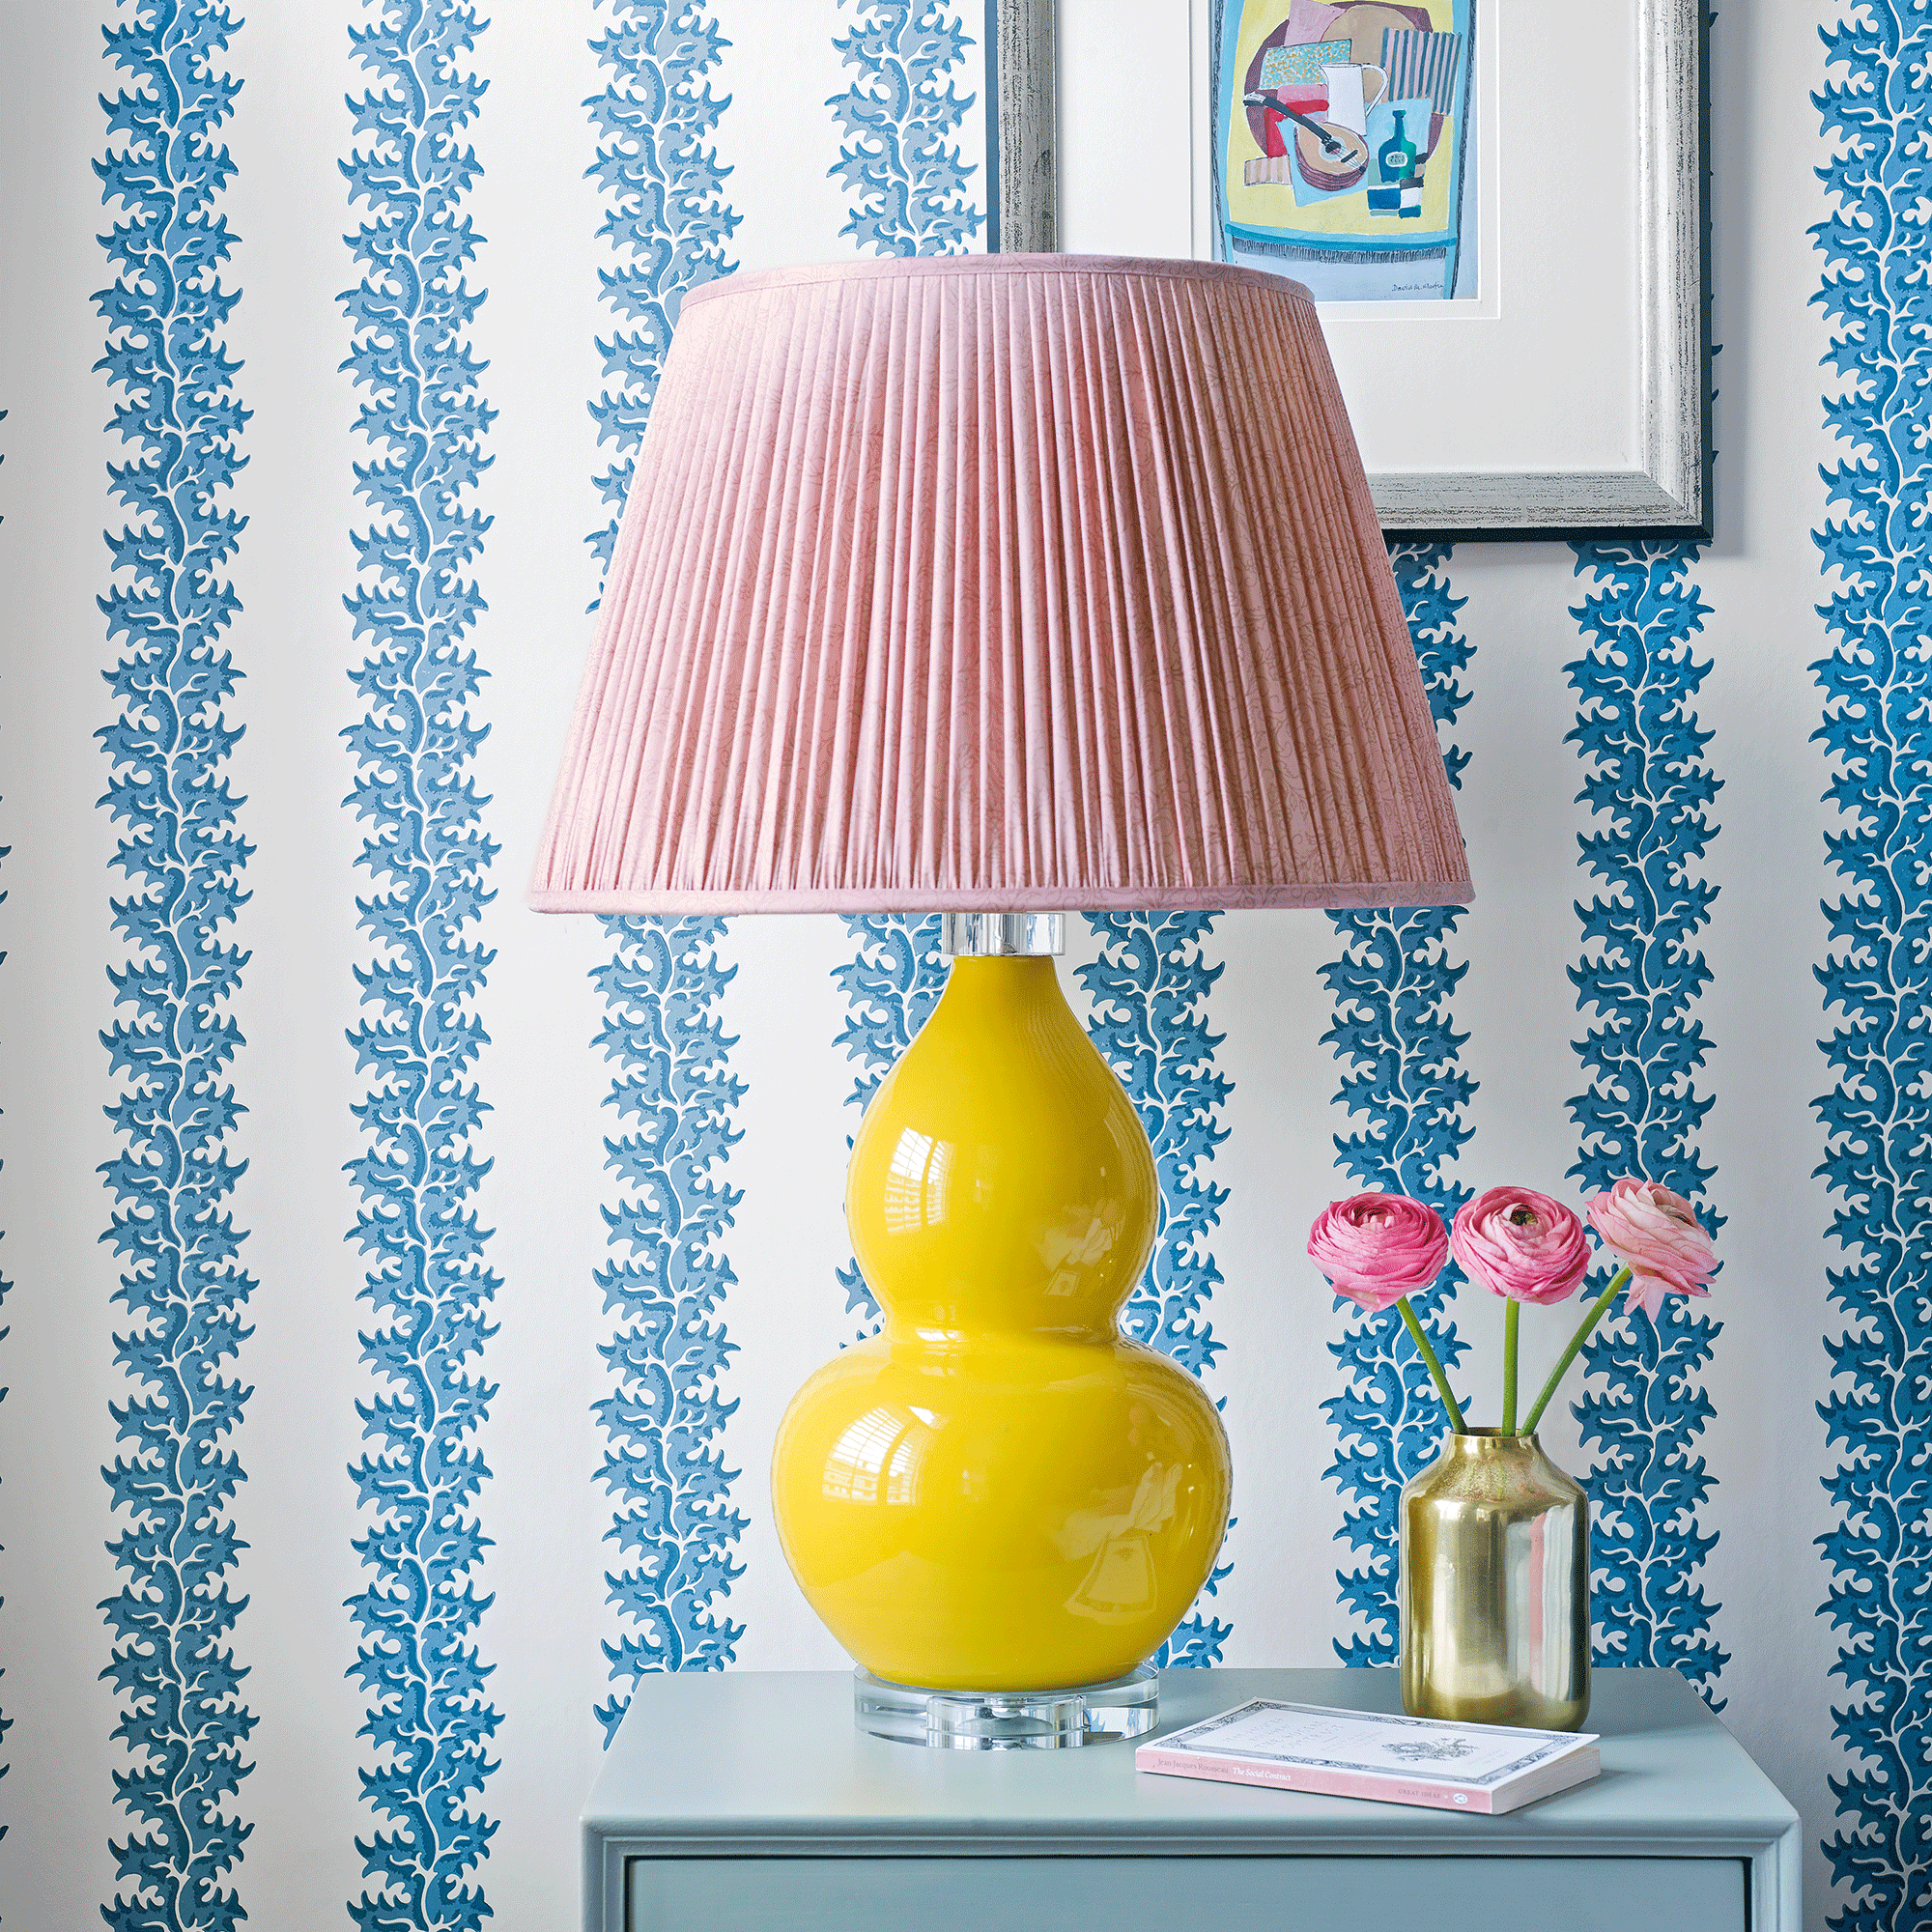 Blue wallpaper with yellow lamp